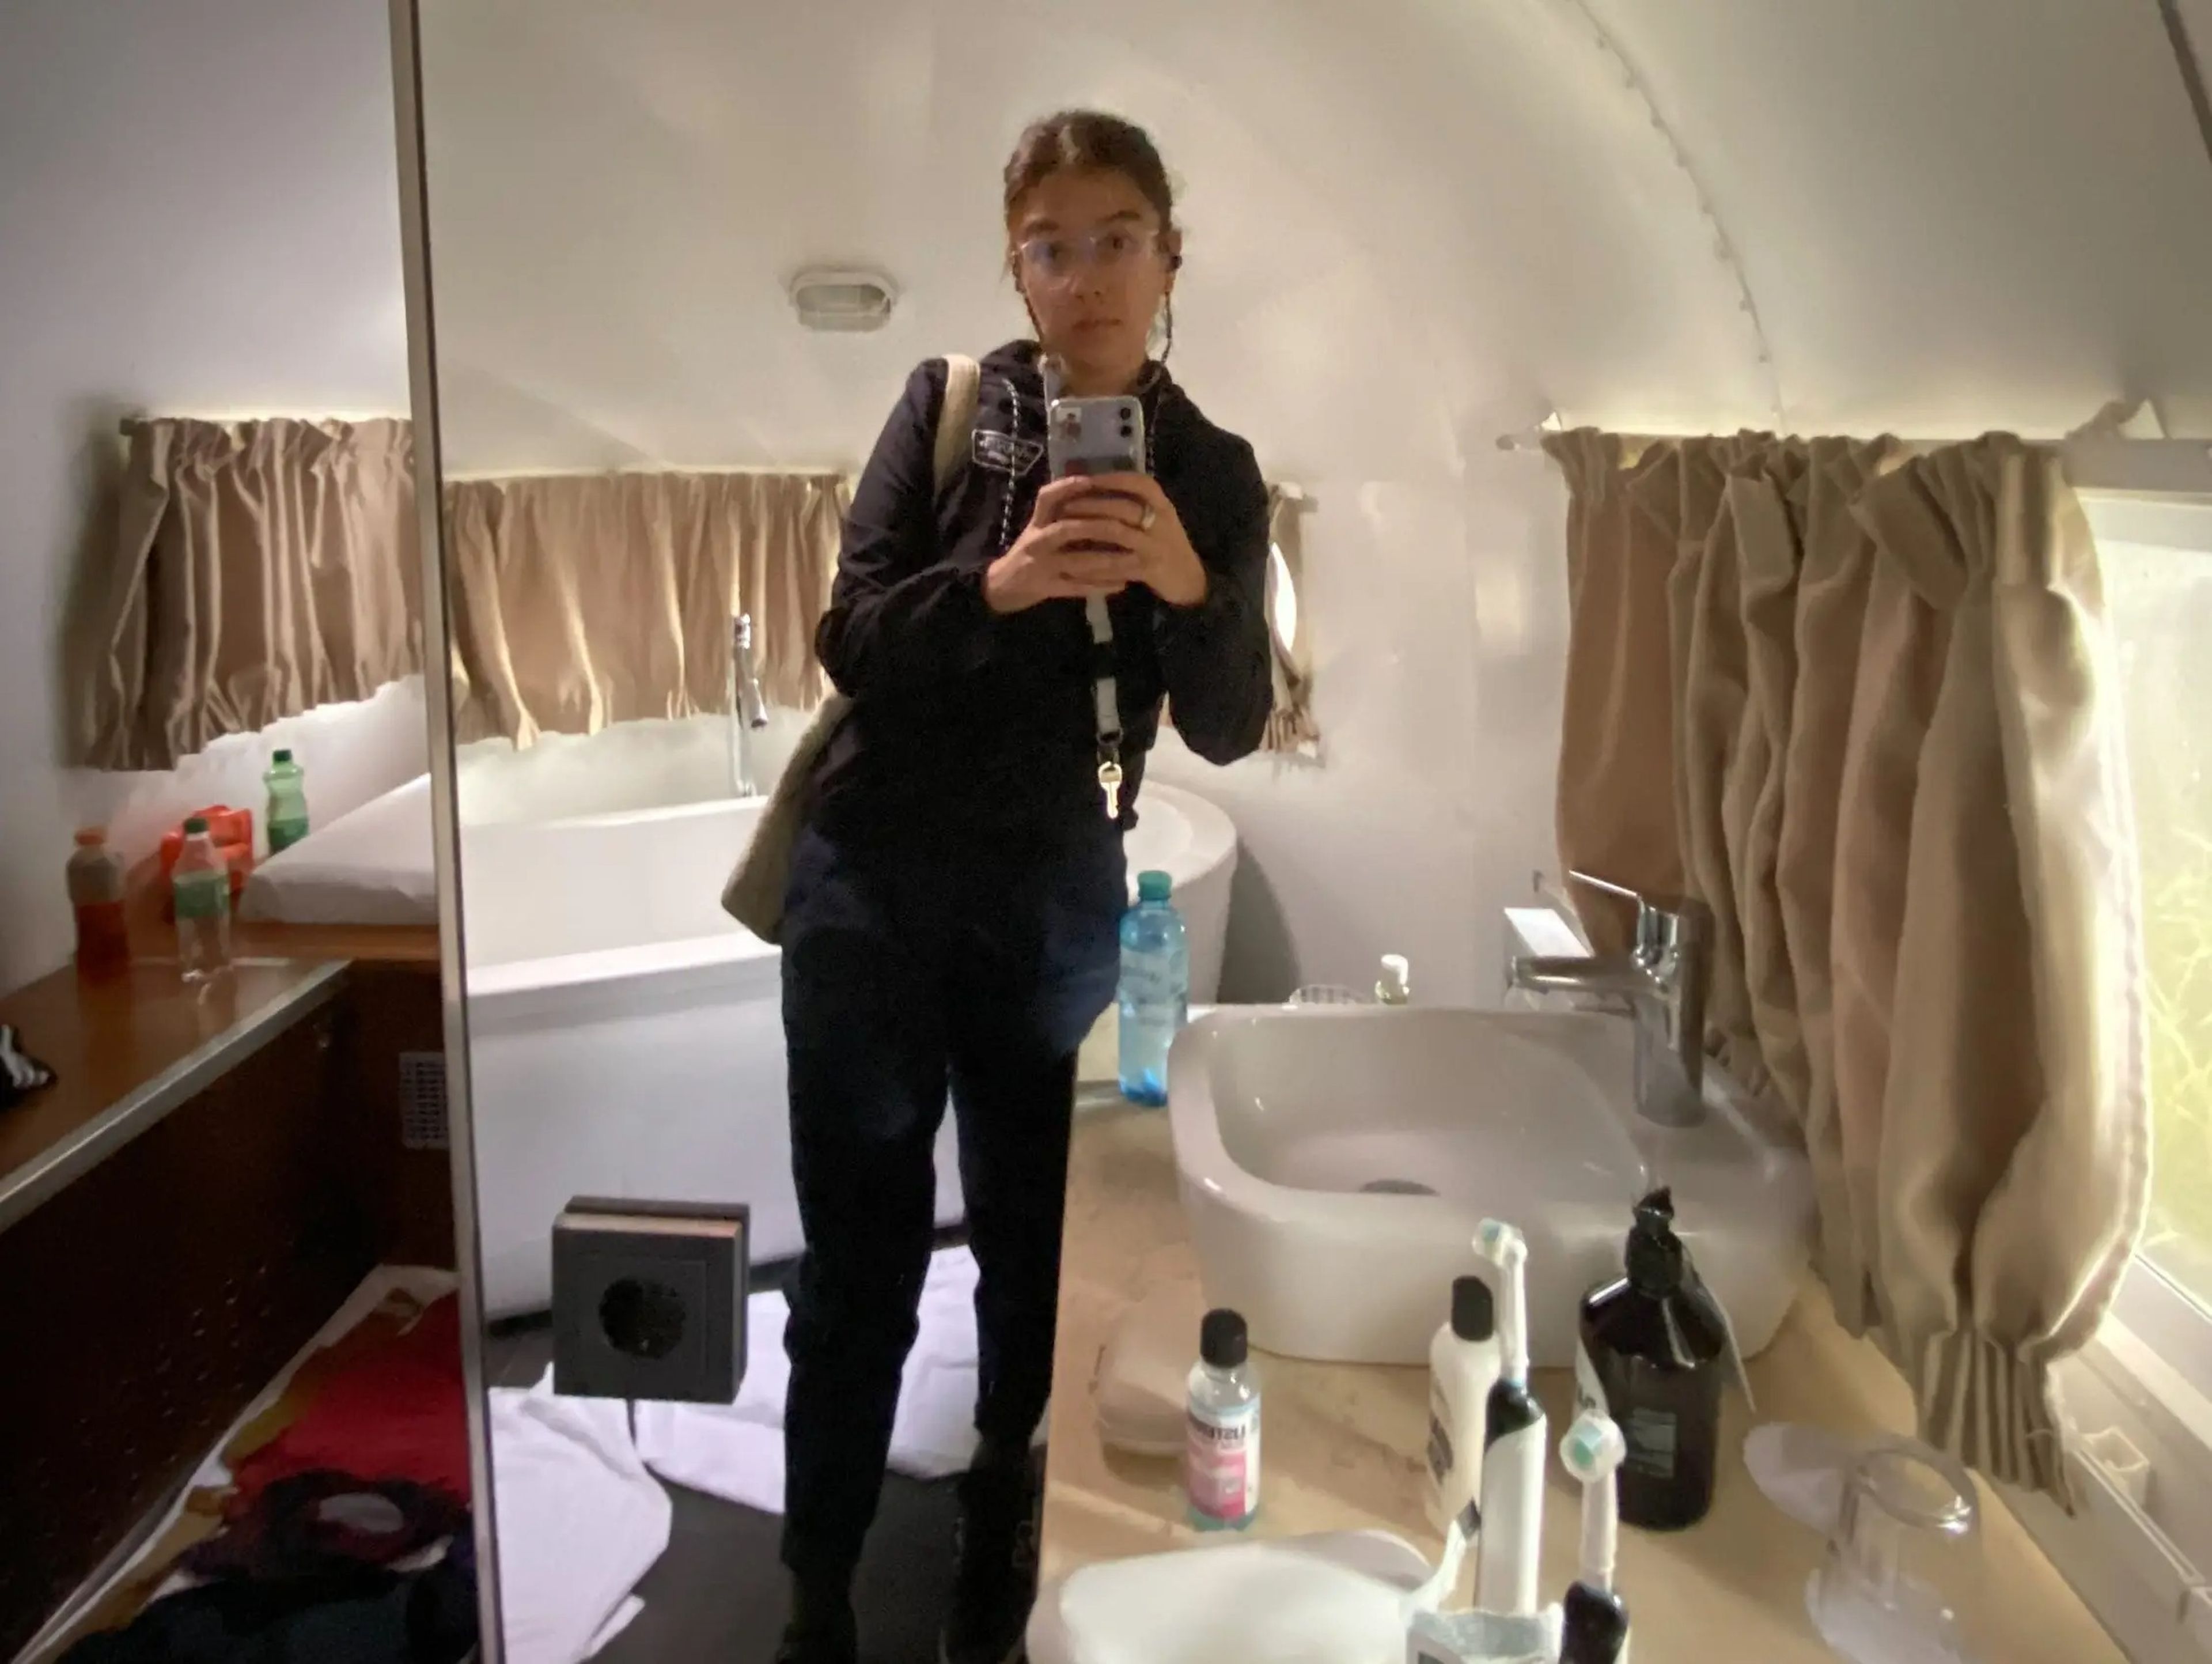 The author Inside the airstream trailer.